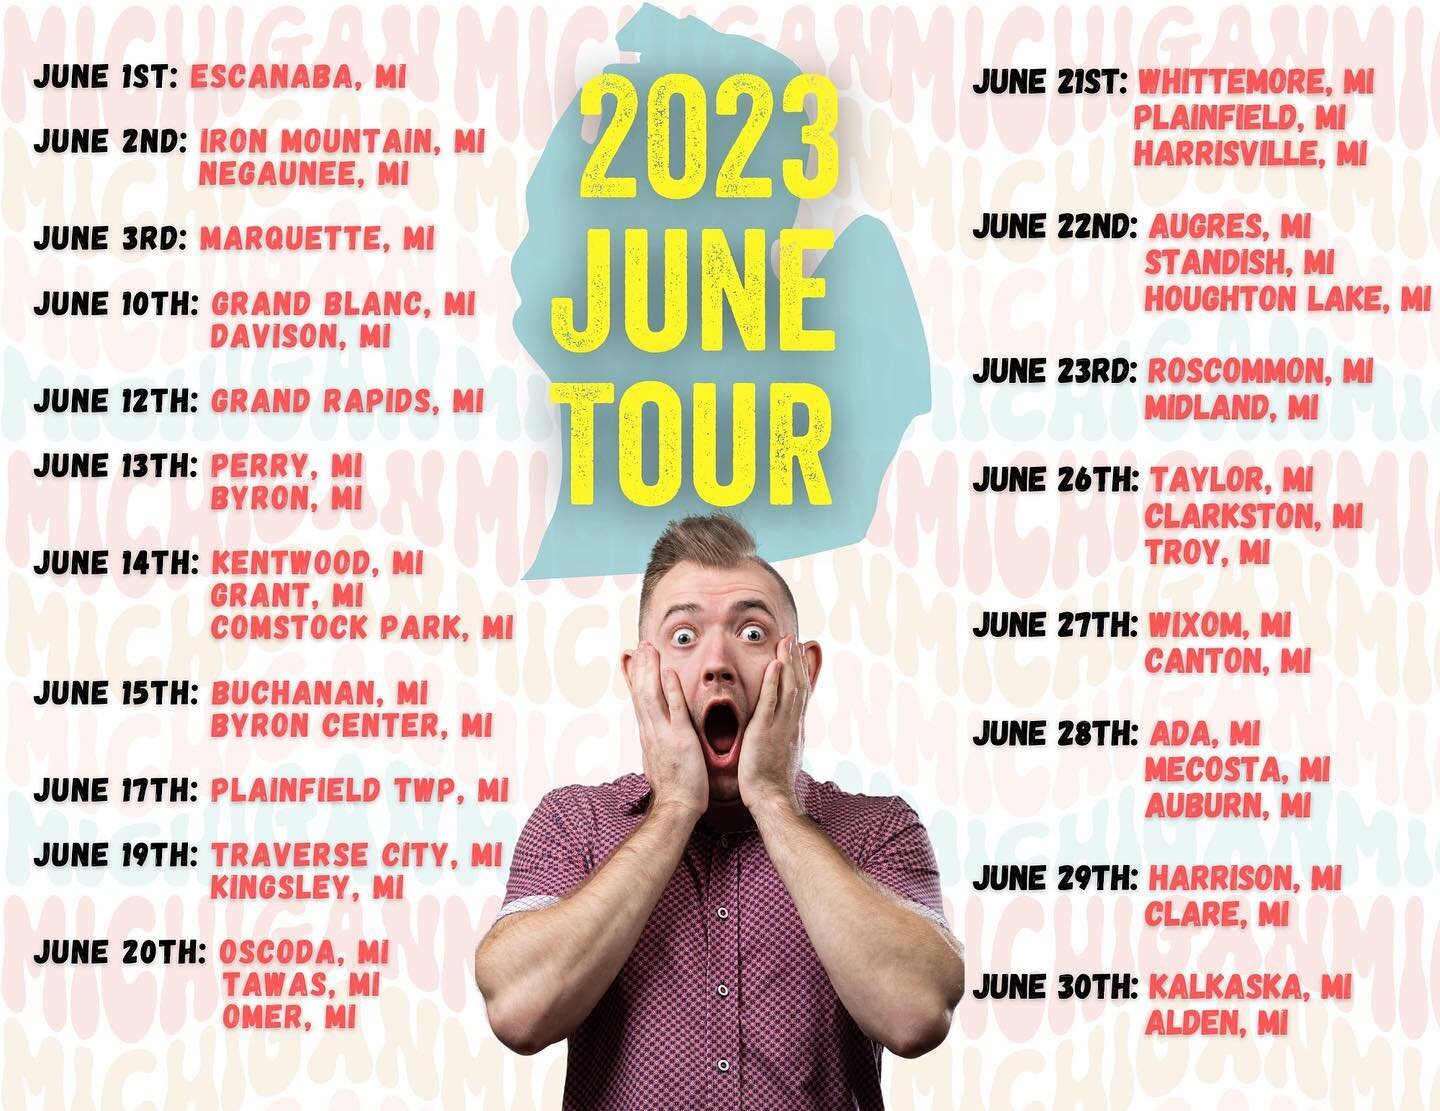 Hey! I&rsquo;m bringing my family show to a town near you this summer🎩❤️

PM for particular dates, locations, times, etc🙃